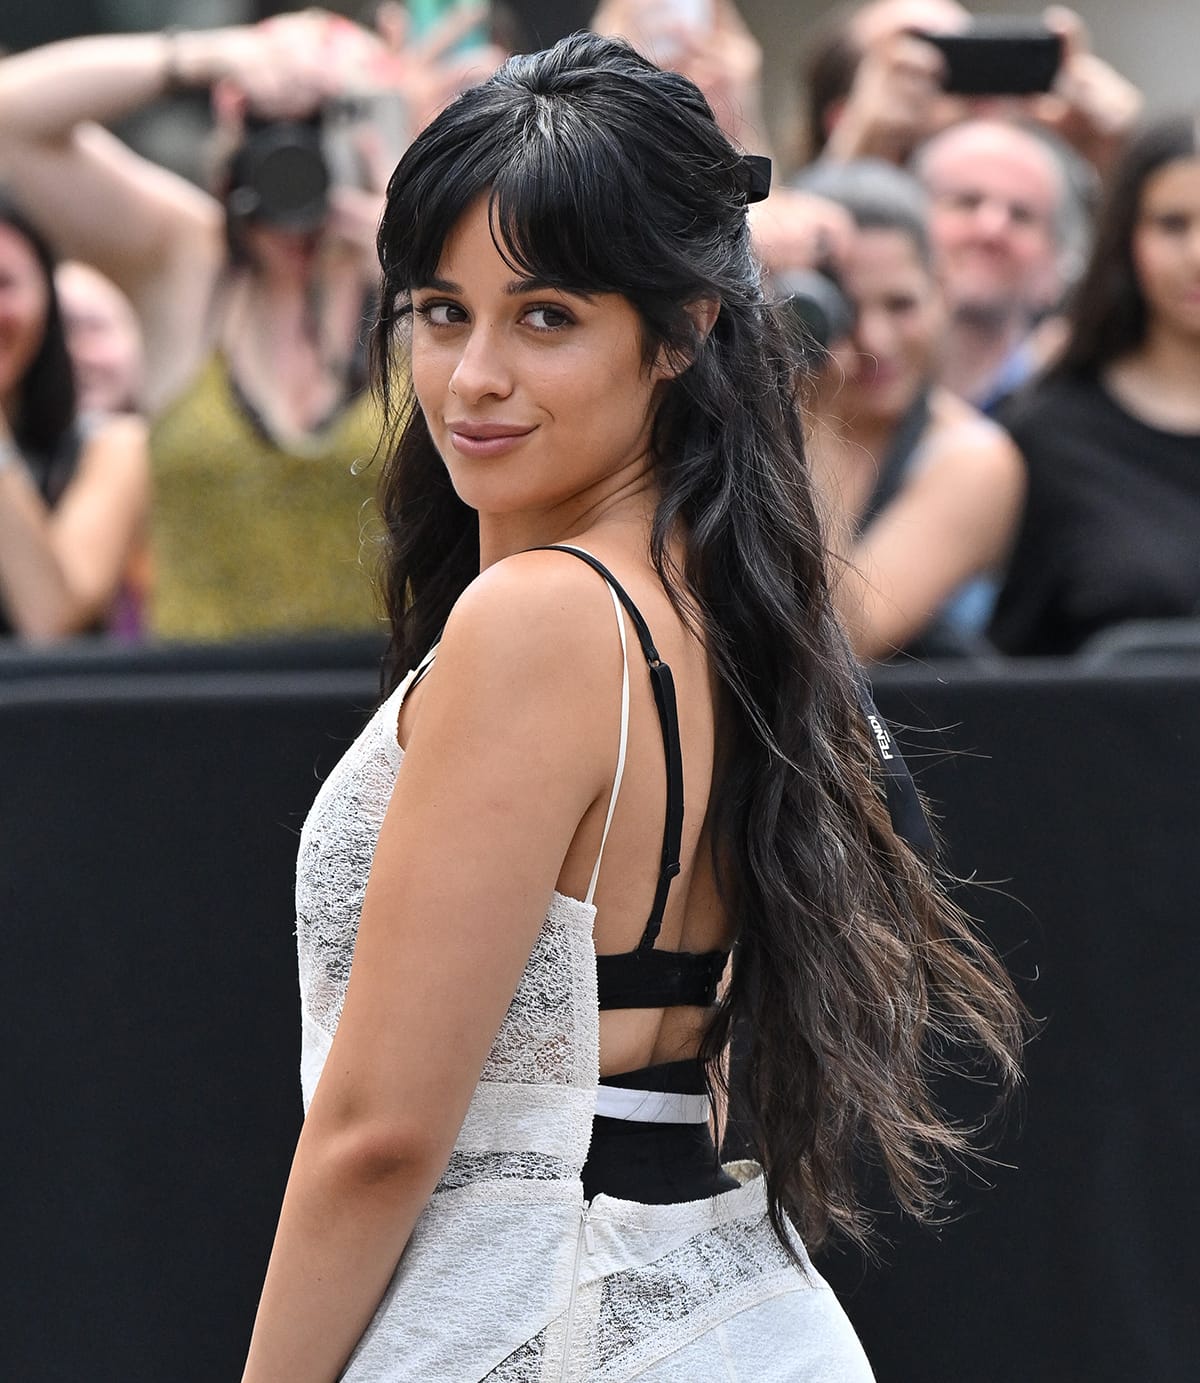 Camila Cabello wears a bronzed and nude makeup look and styles her raven tresses in loose waves before pulling them in a half-up, half-down style